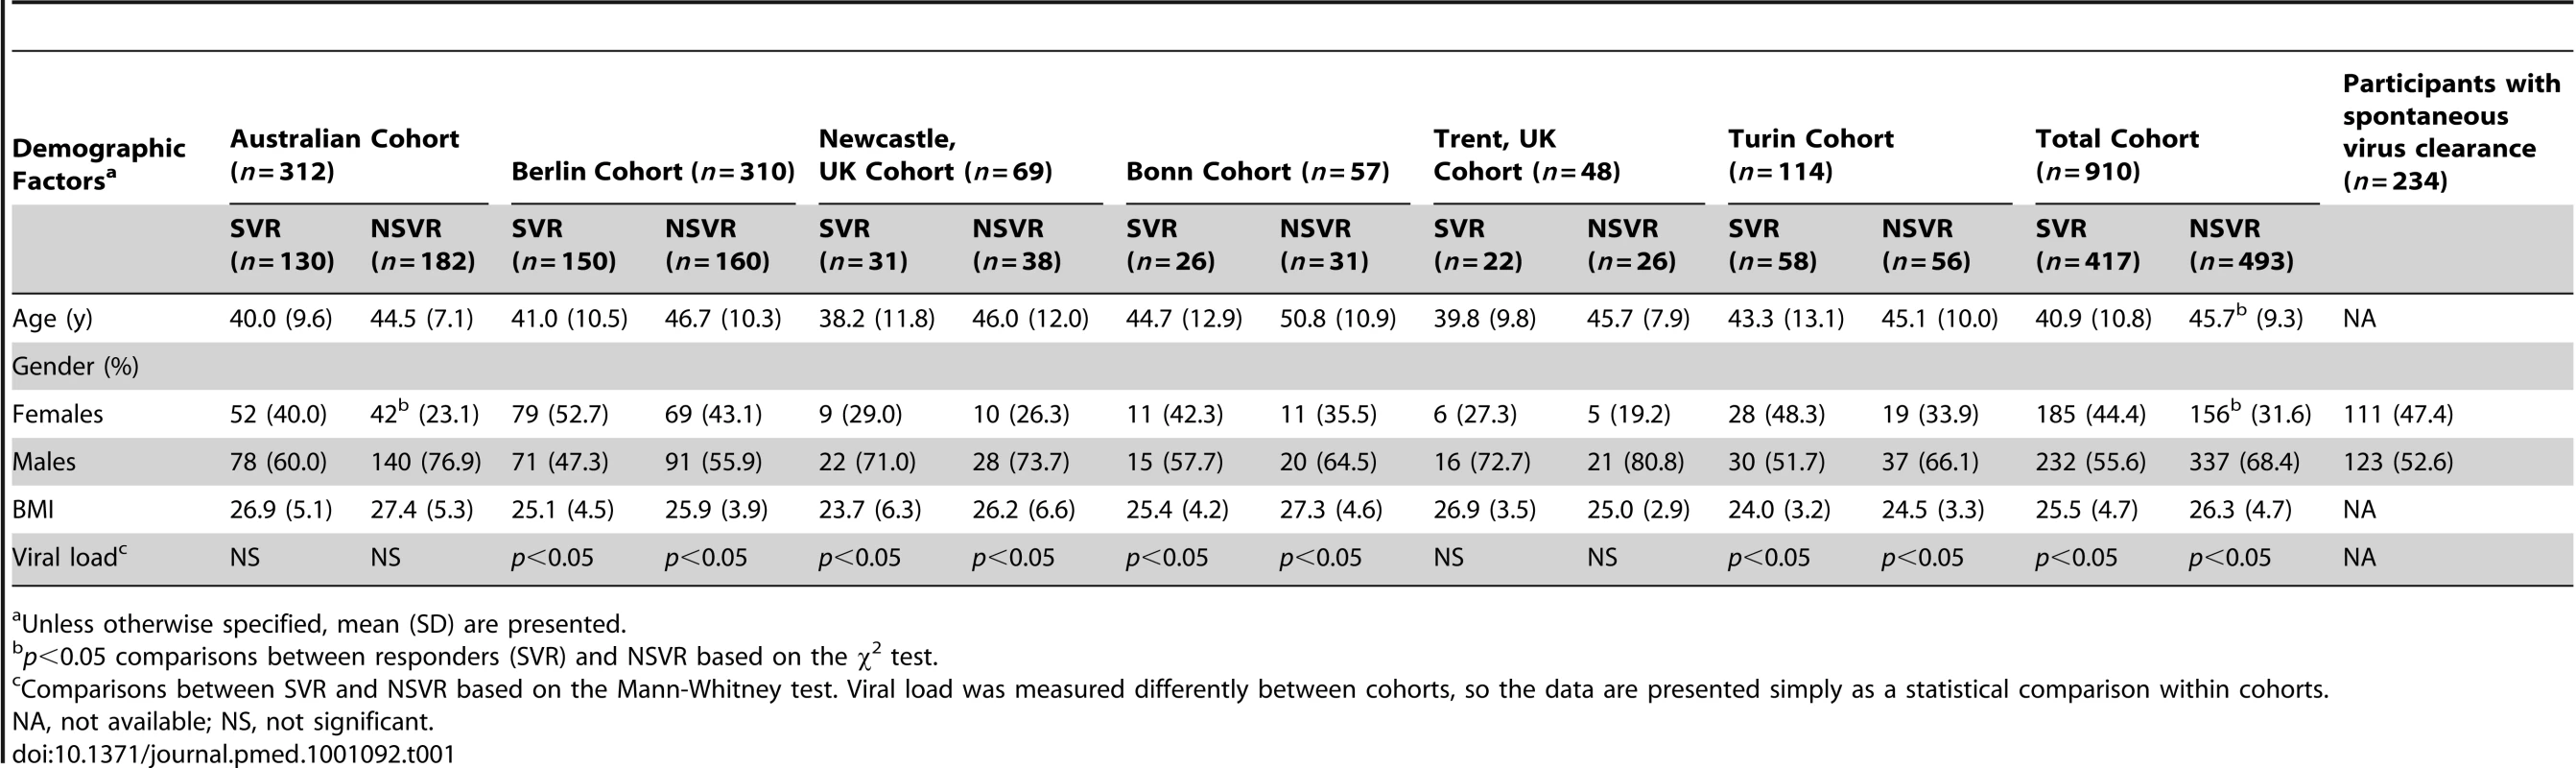 Demographic characteristics for chronic hepatitis C patients after therapy, and for those participants with spontaneous virus clearance of HCV included in this study.